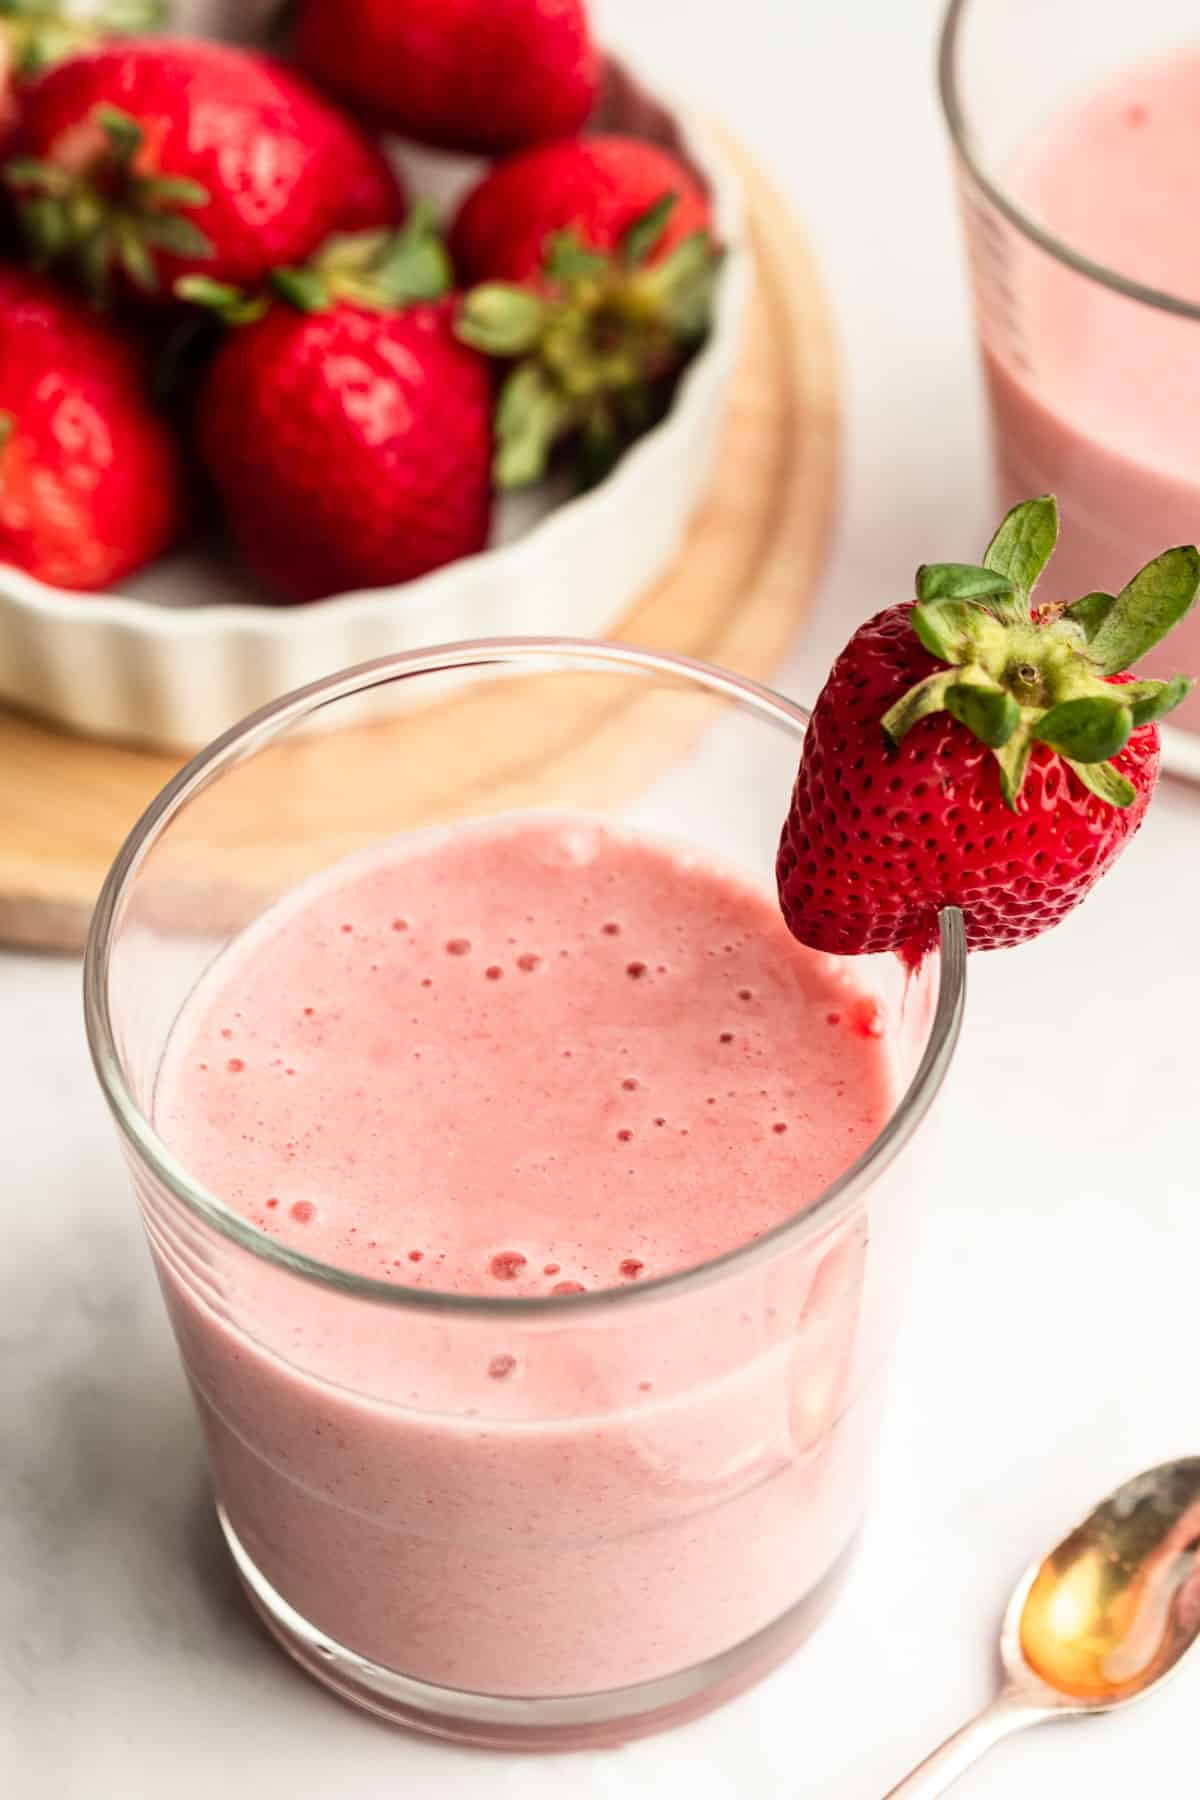 https://thewholecook.com/wp-content/uploads/2022/06/Easy-Strawberry-Banana-Smoothie-1.jpg